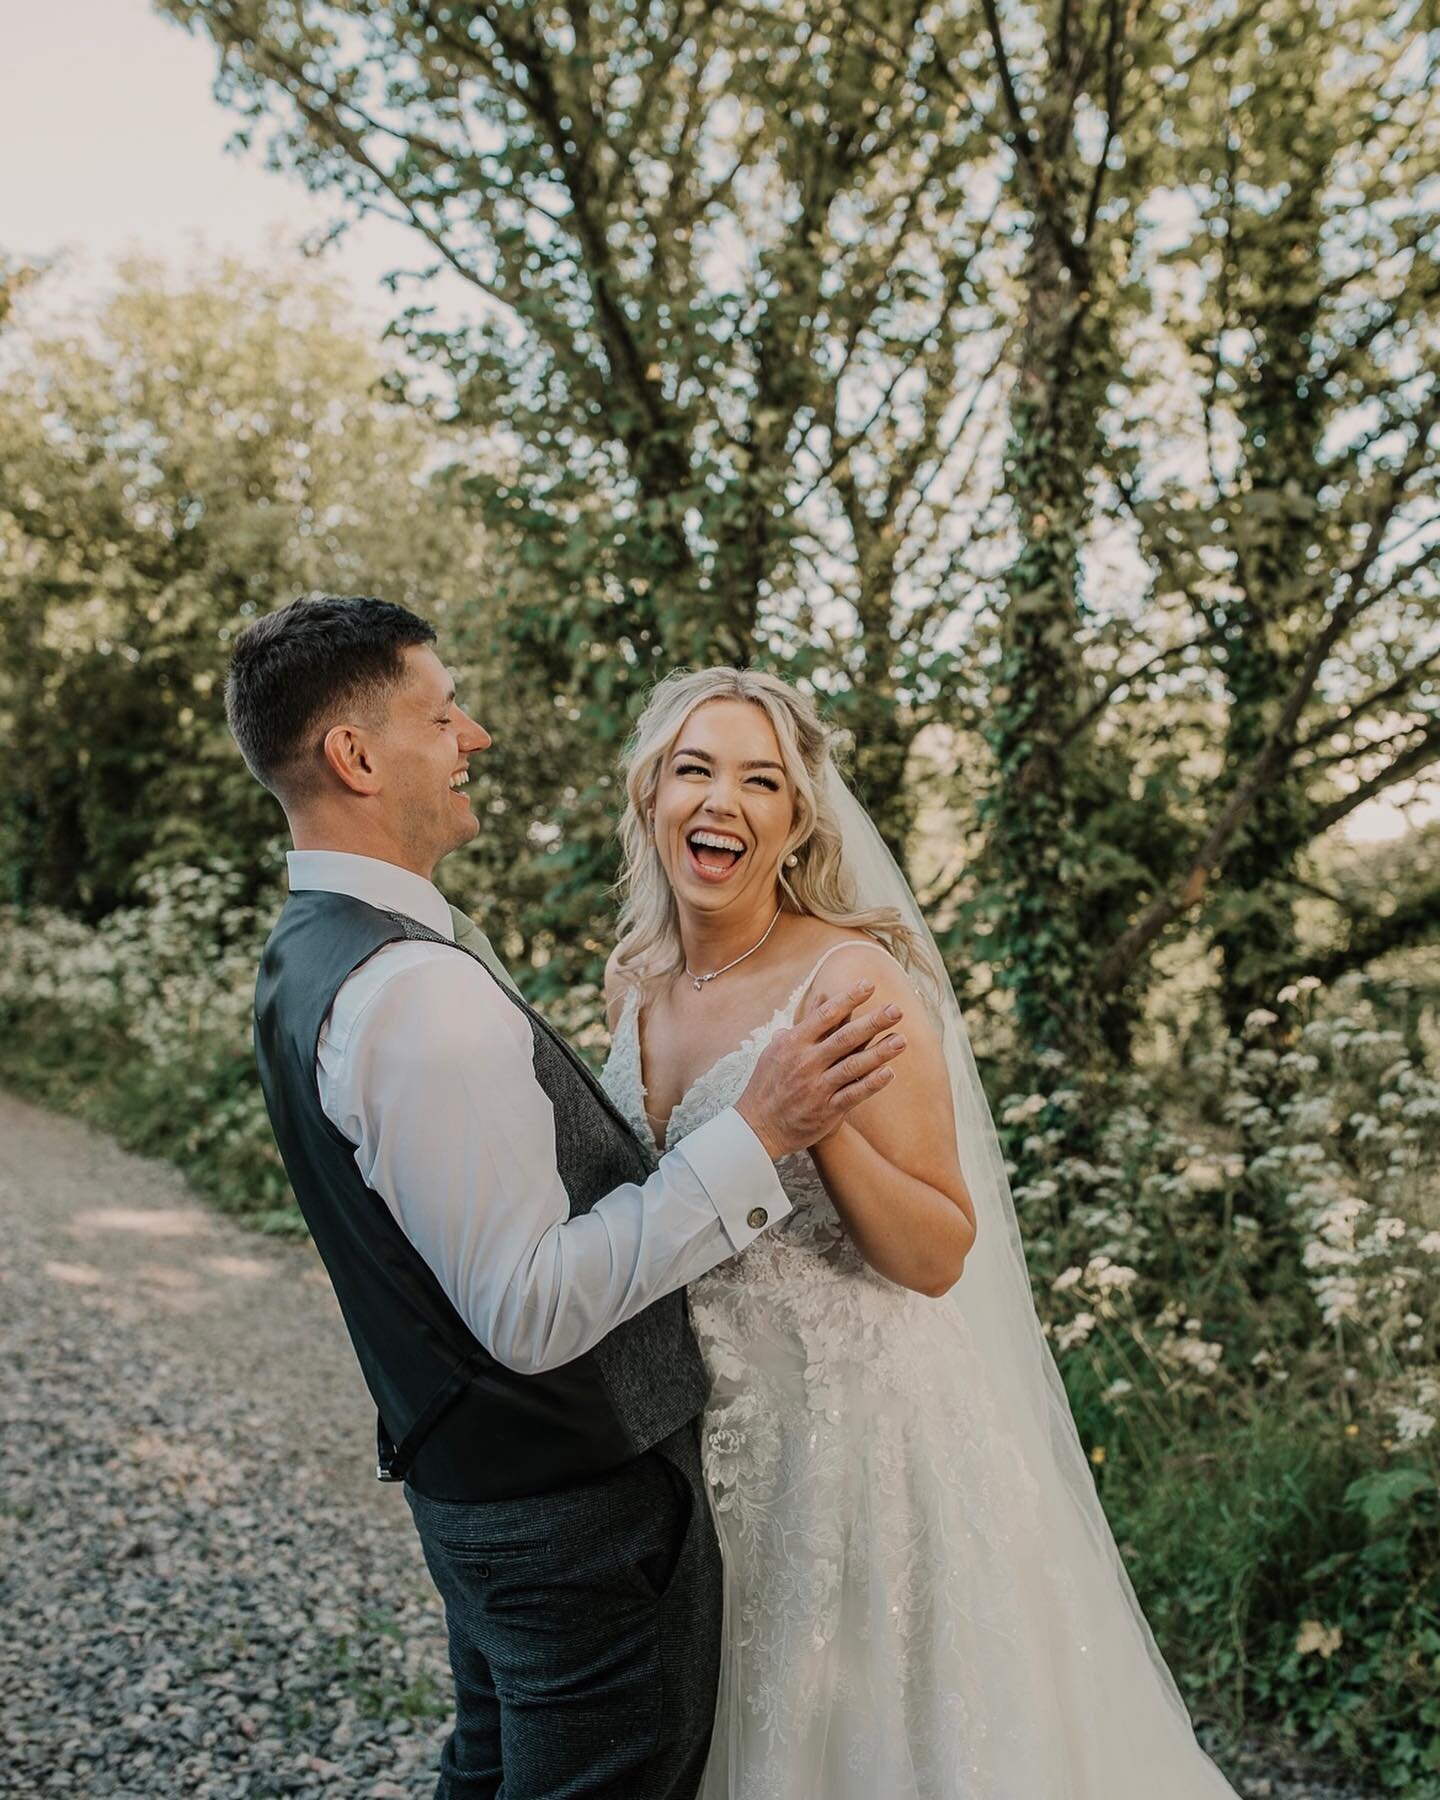 Still swooning over this stunning mid-week wedding last week for this gorgeous couple.
Congratulations Mr and Mrs A, happy one-week anniversary! 🥳
&bull;
&bull;
📷 @pinkwavephotography 
&bull;
&bull;
&bull;
&bull;
#cornishwedding #cornwallwedding #m